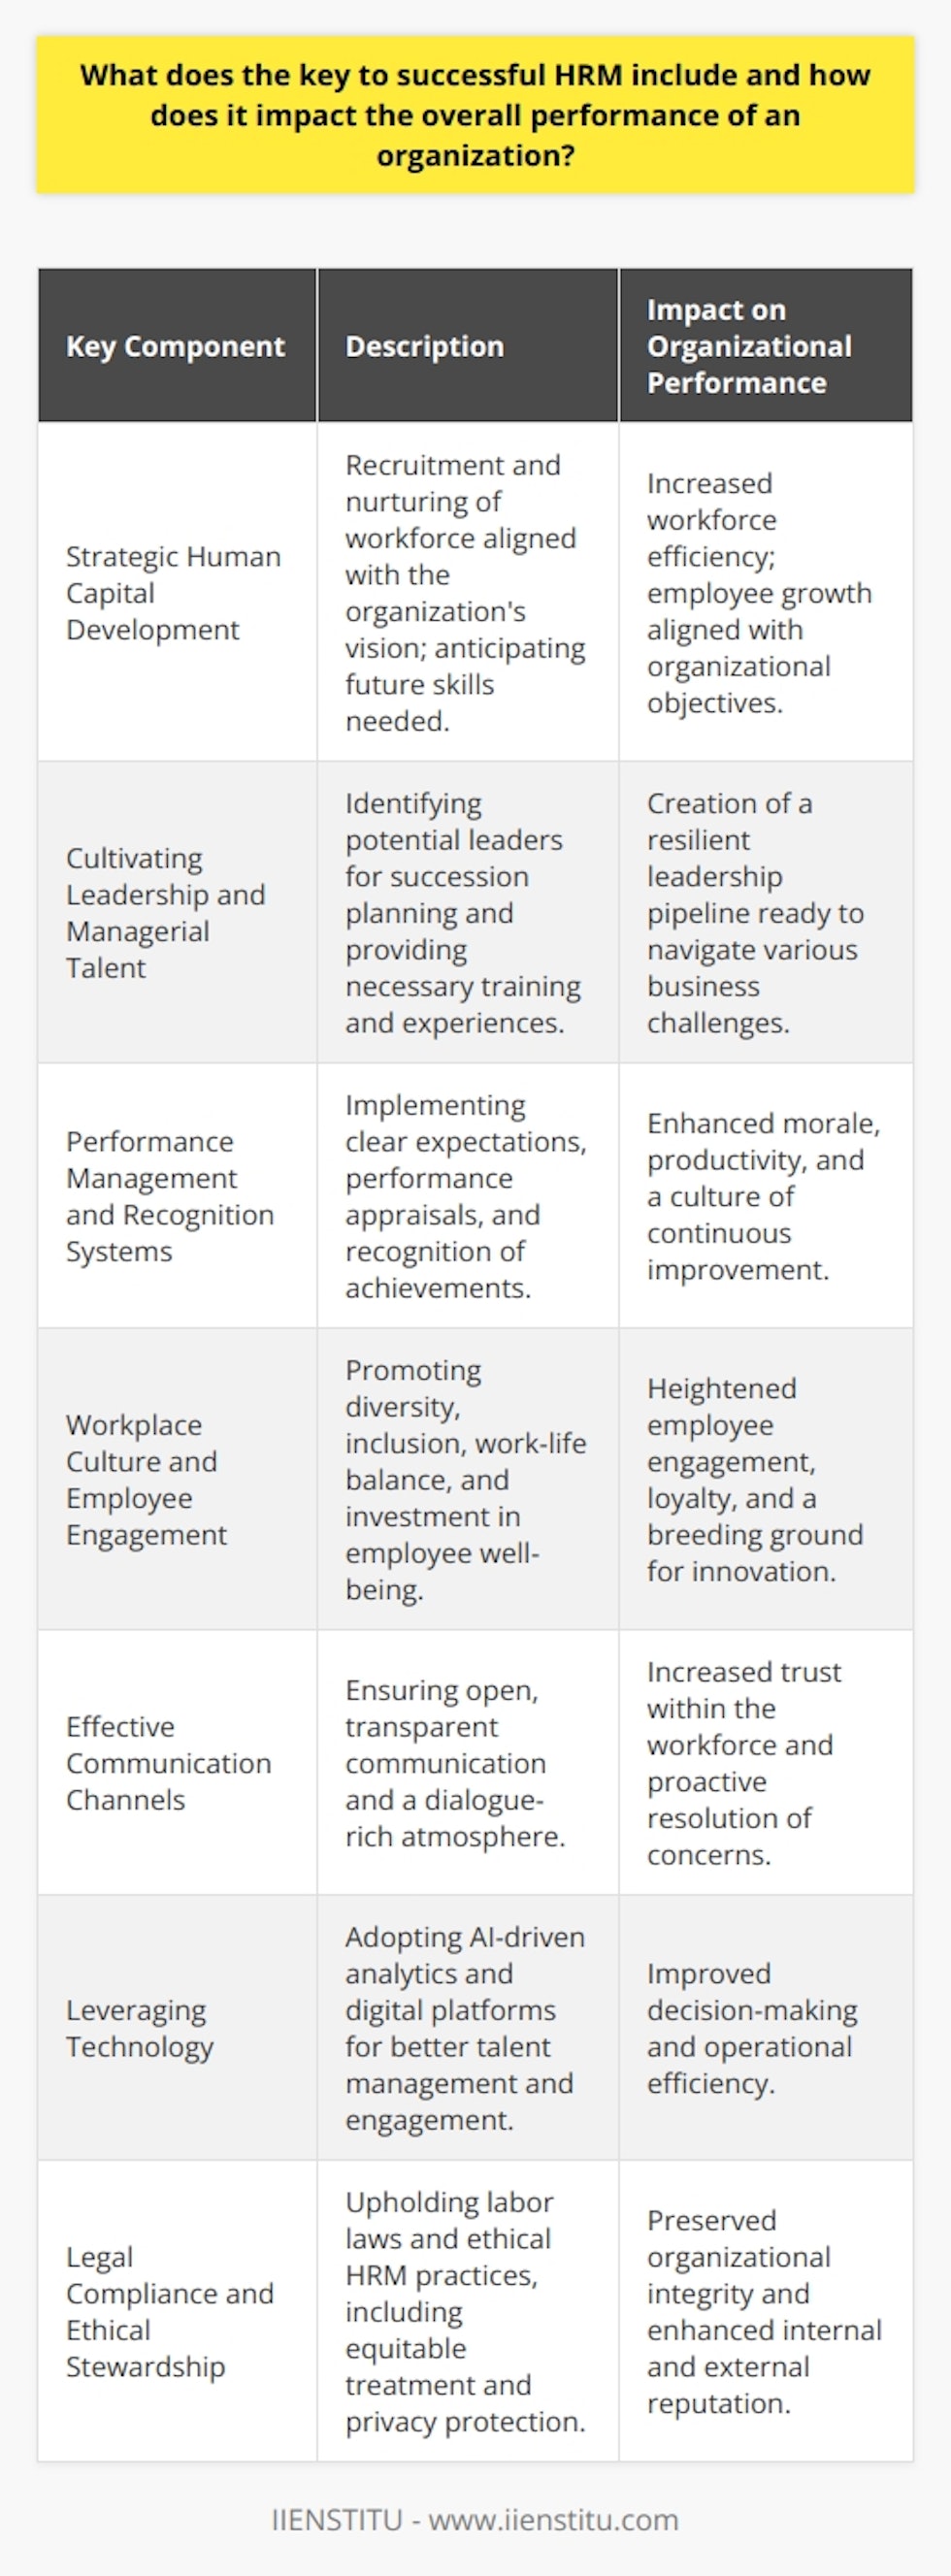 The success of Human Resource Management (HRM) is instrumental in steering an organization towards its objectives. A seamless integration of HRM strategies within the business framework significantly boosts workforce efficiency and organizational agility, which are major determinants of competitive advantage and sustainable growth. To hone a successful HRM strategy, certain key components must be meticulously managed, each contributing to the organizational tapestry in distinct yet complementary ways.**Strategic Human Capital Development**A cornerstone of HRM is strategic human capital development, which involves not just recruitment, but the systematic nurturing of a workforce aligned with the long-term vision of the organization. HR professionals must possess a forward-thinking mindset, anticipating future skills requirements and instituting development programs tailored to bridge the skills gap. By aligning employee aspirations with organizational goals, HR can catalyze a mutually beneficial growth trajectory.**Cultivating Leadership and Managerial Talent**The nurturing of leadership talent is imperative to the organization's succession planning. HRM should focus on identifying potential leaders and providing them with the necessary training and experiences to prepare them for future roles. Through mentoring programs and leadership workshops, HR can ensure a resilient pipeline of skilled leaders ready to guide the organization through various business landscapes.**Performance Management and Recognition Systems**Robust performance management systems lay the groundwork for setting clear expectations and tracking employee progress. An effective HRM strategy encompasses setting SMART goals, regular performance appraisals, and real-time feedback mechanisms. Constructive conversations about performance foster a culture of transparency and continuous improvement. Moreover, systematically recognizing achievements galvanizes workforce morale and drives higher productivity.**Workplace Culture and Employee Engagement**A vibrant workplace culture where employees feel valued is pivotal to sustaining engagement. HRM strategies that encourage diversity, inclusion, and a holistic work-life balance pave the way for a more committed workforce. Personal investment in employees' well-being and professional progression enhances loyalty and cultivates an environment where innovation can thrive.**Effective Communication Channels**Transparent and consistent communication within an organization is a vital element of HRM. Open lines of communication elevate trust and enable the resolution of concerns proactively. HRM should facilitate a dialogue-rich atmosphere where feedback is not just encouraged but also acted upon.**Leveraging Technology**In an era dominated by technological advances, harnessing the right tools for HR processes, like AI-driven analytics for talent management and digital platforms for employee engagement, can lead to more informed decision-making and operational efficiency.**Legal Compliance and Ethical Stewardship**Compliance with labor laws and regulations fortify the organization's integrity and prevent legal pitfalls. Ethical stewardship in HRM practices, including equitable treatment and privacy protection, reinforces the organization's reputation both internally and externally.**Impact on Organizational Performance**The meticulous application of these components culminates in a robust HRM framework, which has a profound ripple effect on overall organizational performance. When HRM effectively orchestrates talent management, cultivates leaders, maintains performance benchmarks, and fosters an inclusive culture, the organization is well-armed to face market demands. This leads to improved financial performance, enhanced brand reputation, and a solid competitive stance.In essence, the tapestry of successful HRM is woven with diverse threads — each crucial and interdependent. As organizations navigate through the evolving business terrains, those that adeptly align their HRM strategies with their overarching mission are best positioned to catalyze enduring success.